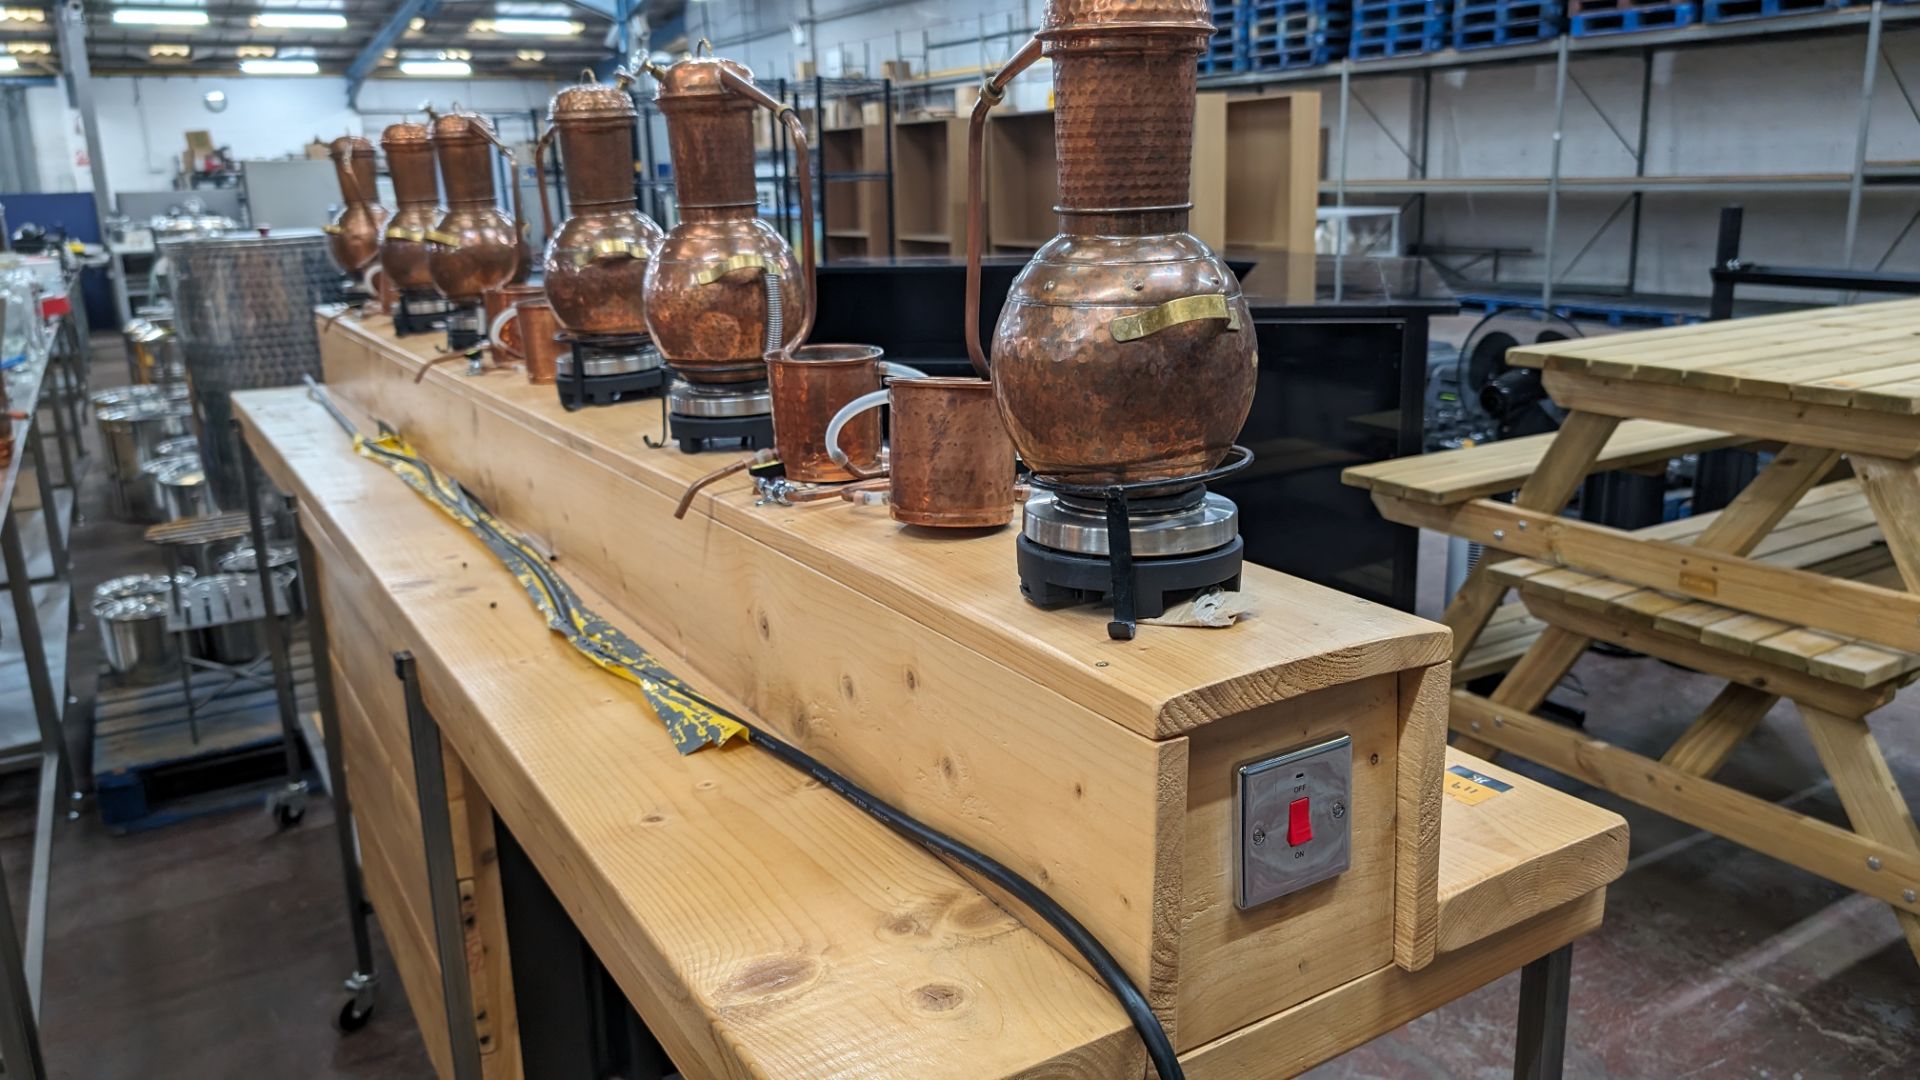 6 off small stills plus mobile bench. This lot comprises a custom made mobile bench with a metal fr - Image 10 of 18